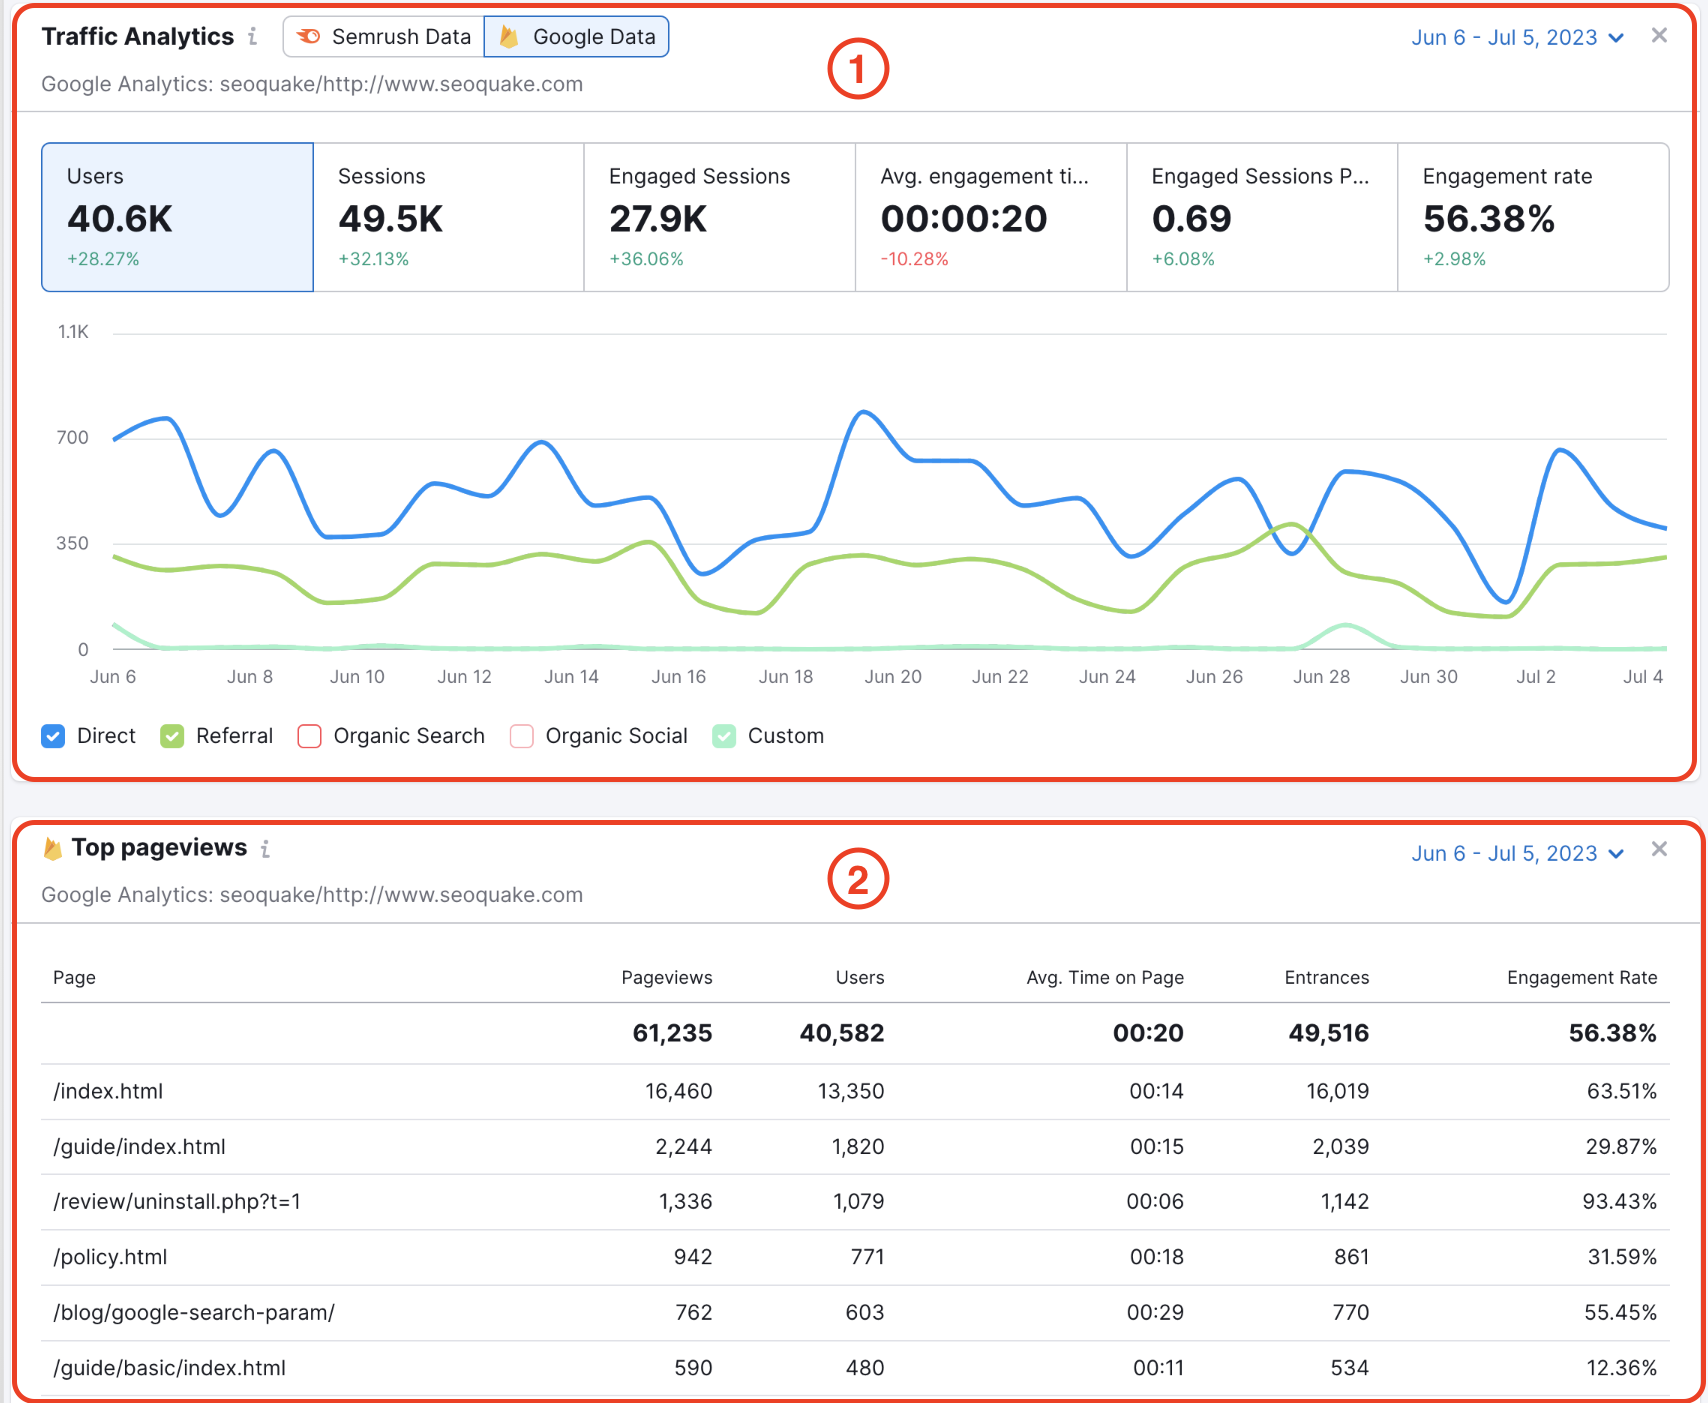 An example of a Google Analytics widget in the Traffic Analytics section in SEO Dashboard.